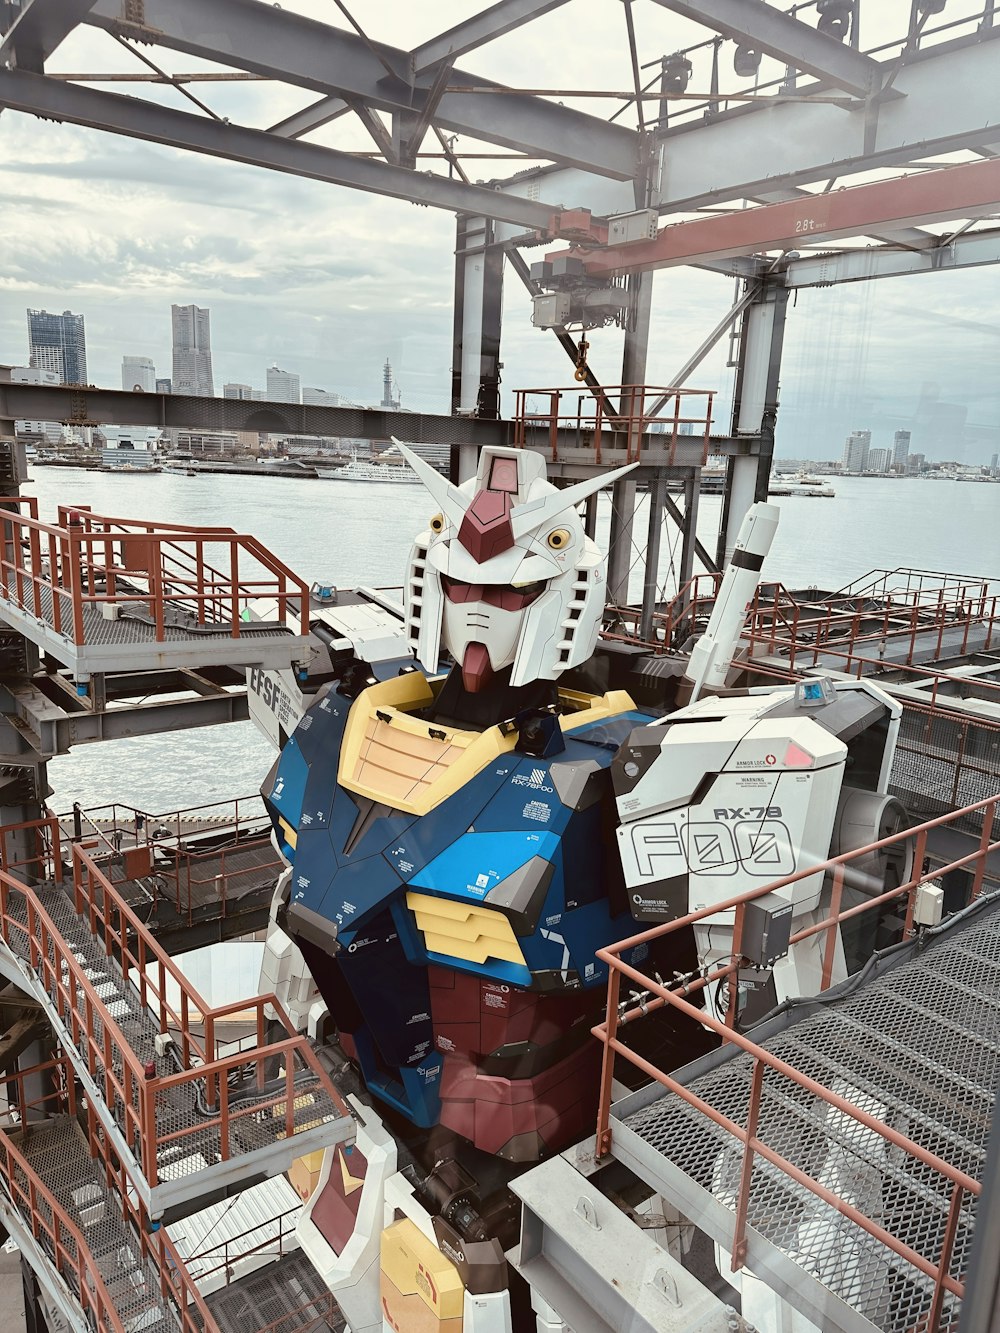 a giant robot statue sitting on top of a boat